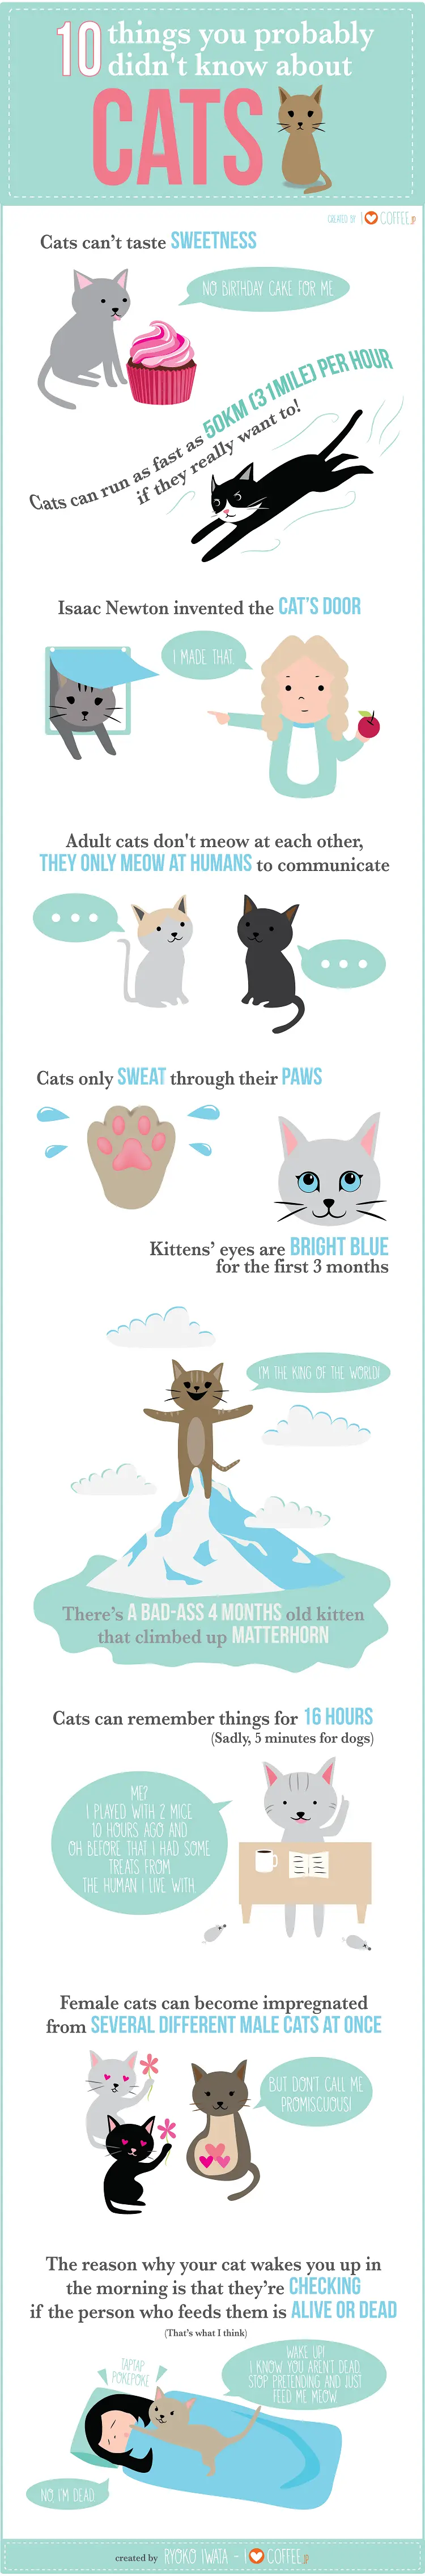 10-things-about-cats